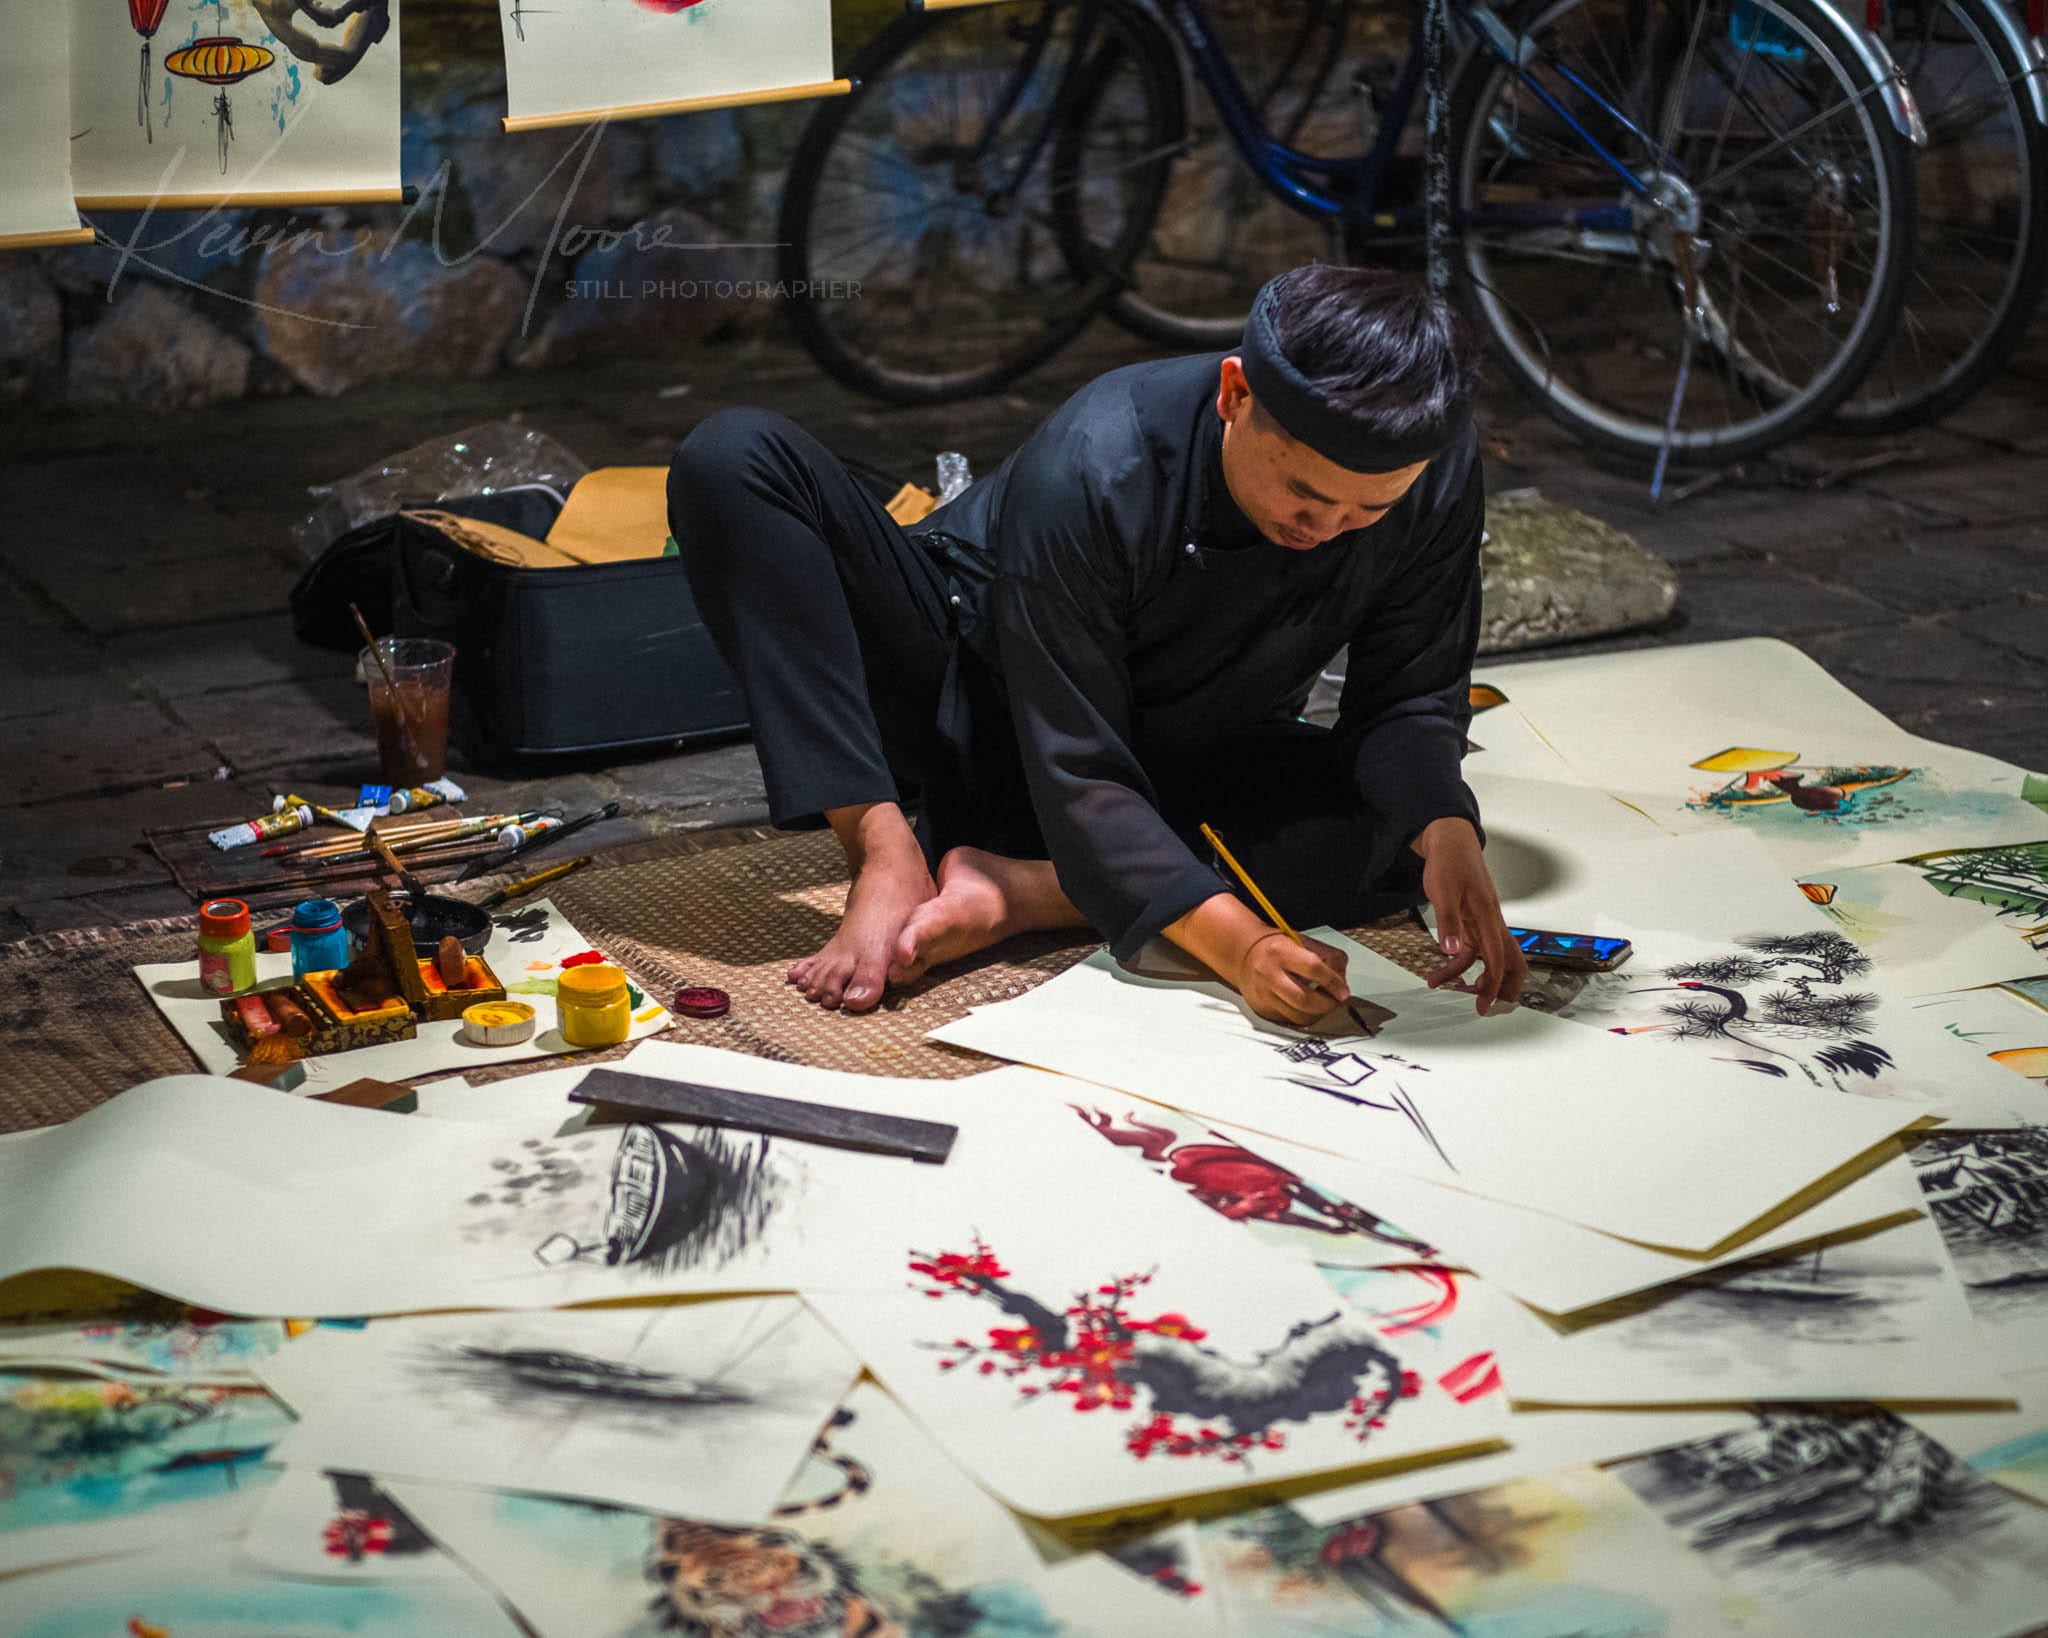 Traditional artist creating East Asian ink wash paintings in a public setting.